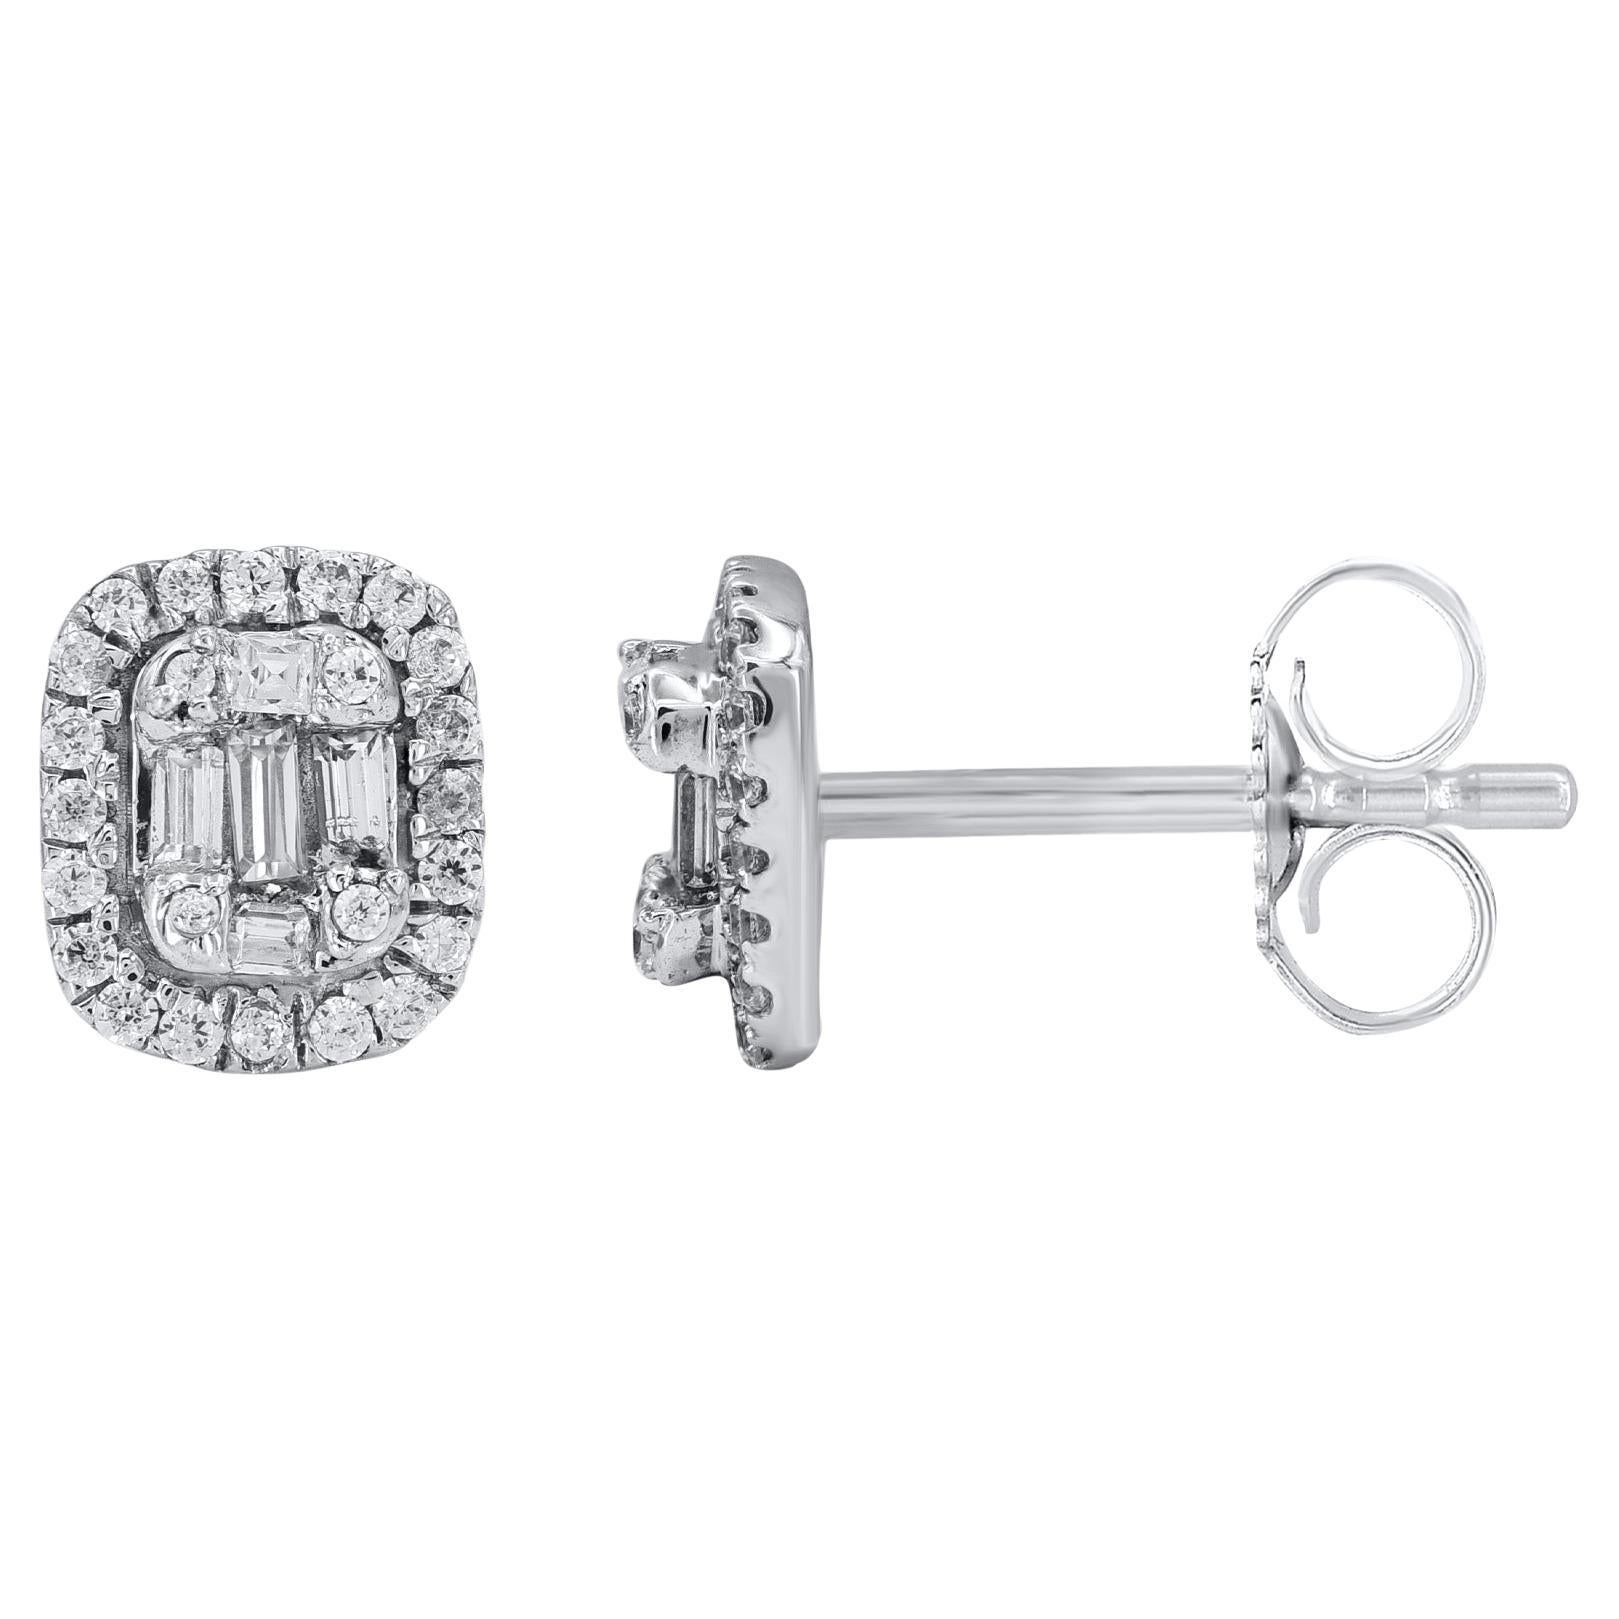 Timeless and elegant, these diamond stud earring are a style you'll wear with every look in your wardrobe. This earring is beautifully designed and studded with 58 round single cut diamond and baguette diamond set in prong & channel setting. We only